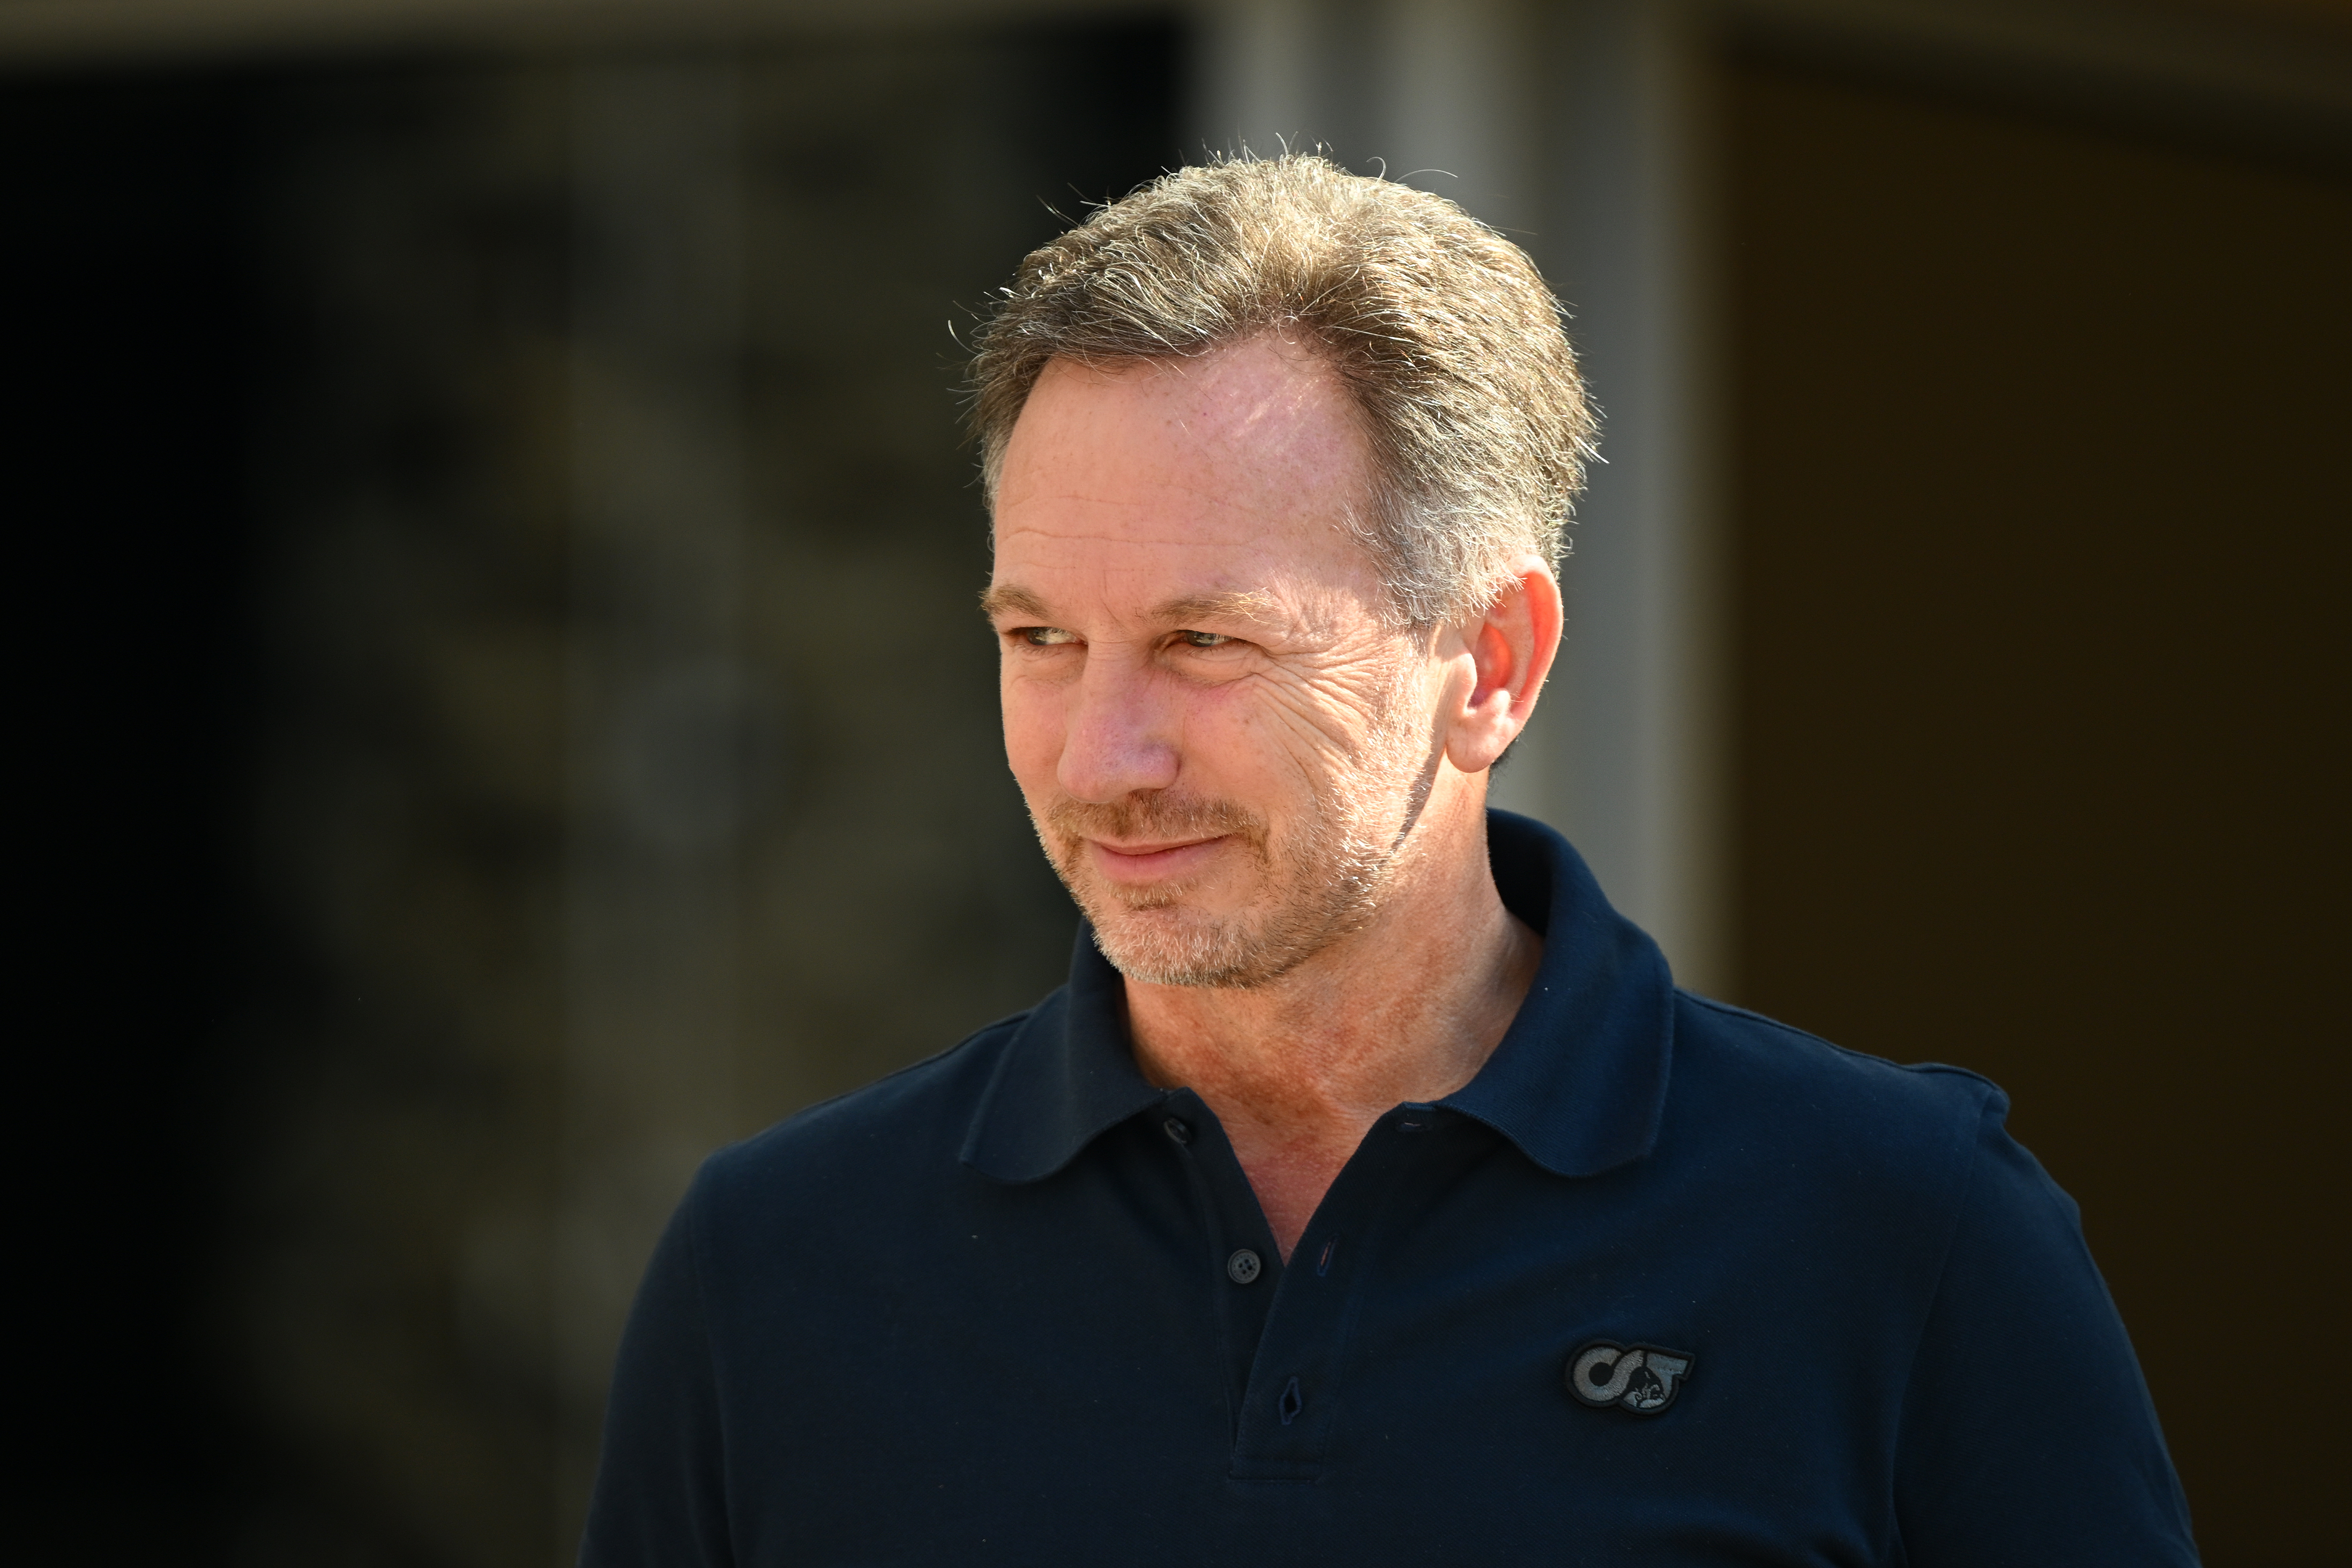 Horner is facing an investigation over claims of 'inappropriate behaviour'